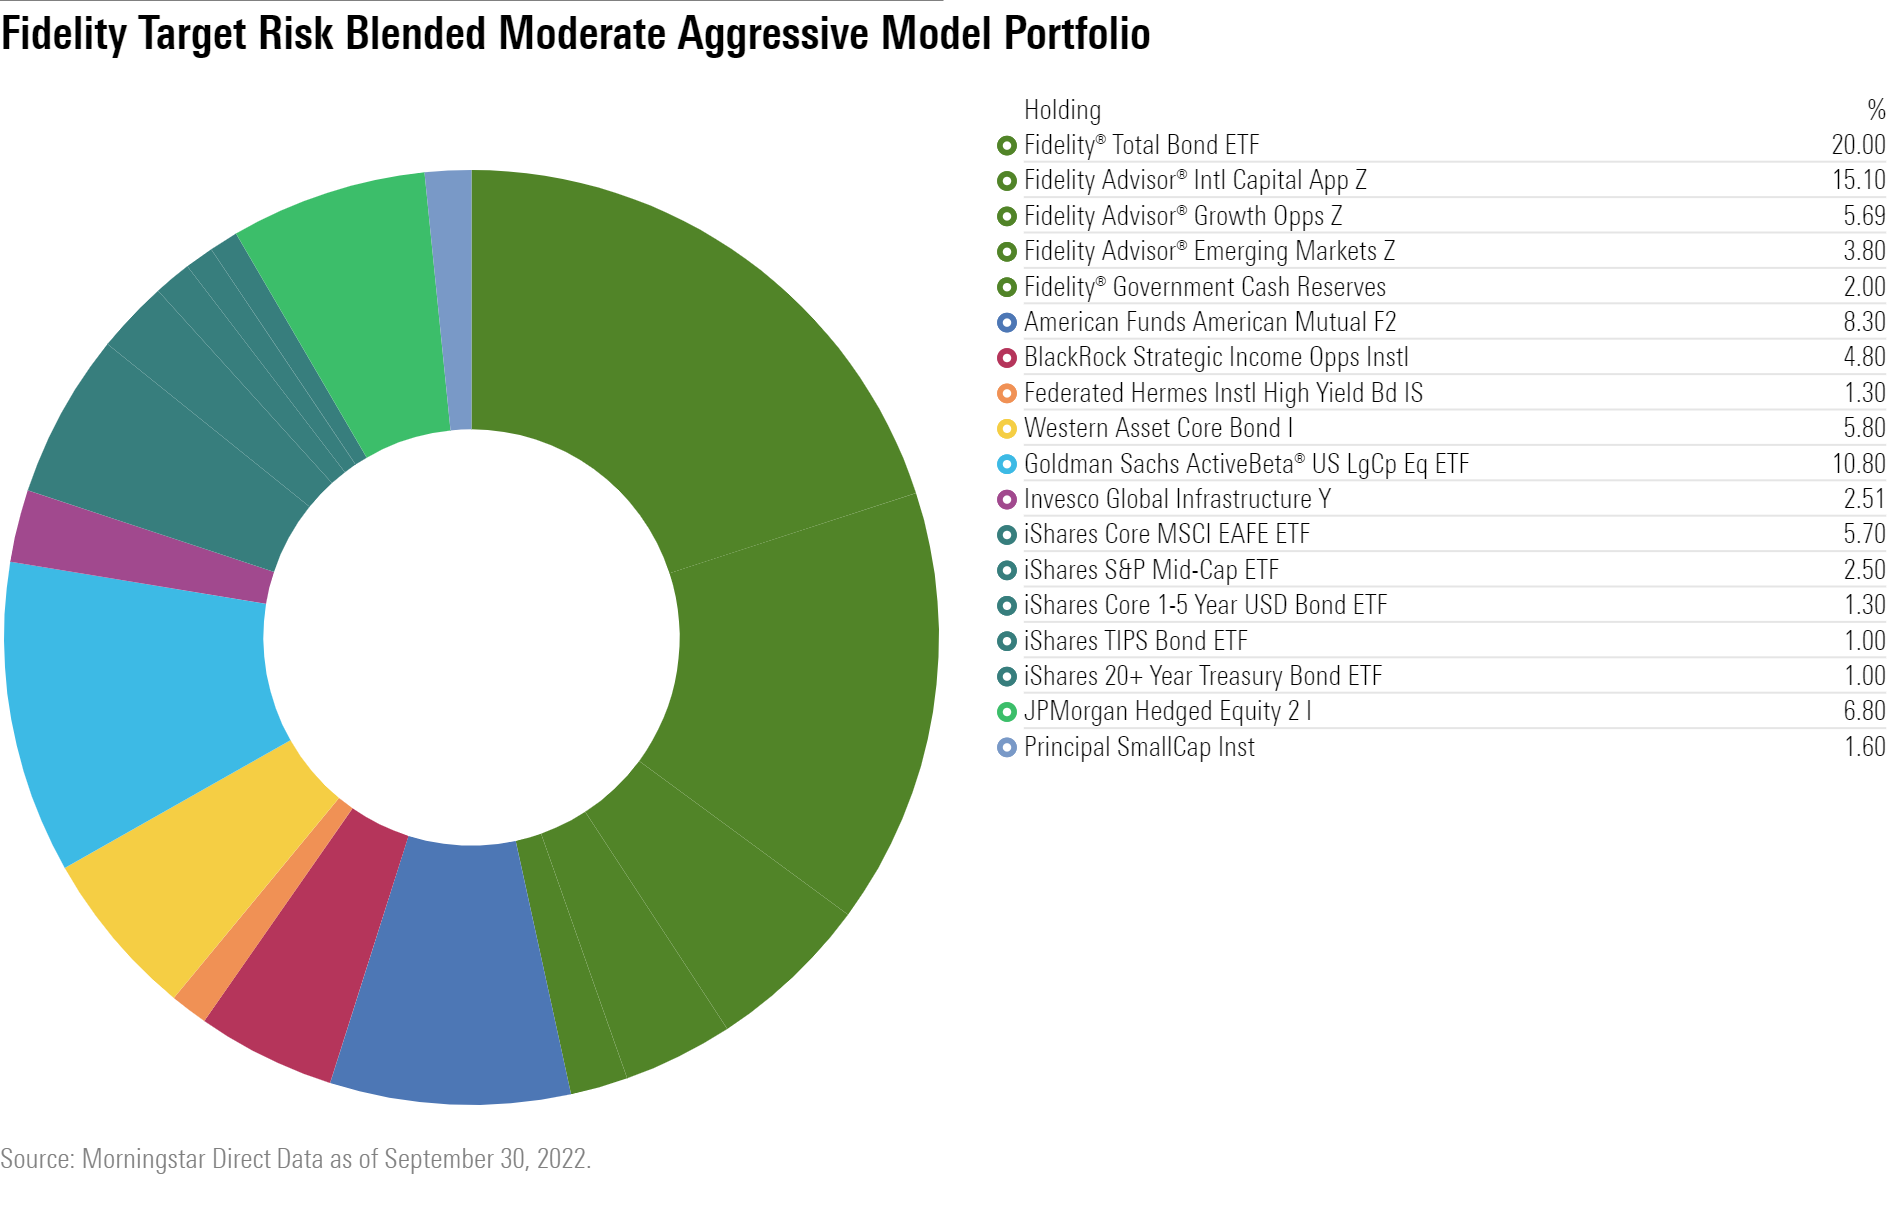 This chart breaks out the individual holdings of the Fidelity Target Risk Blended Moderate Aggressive model portfolio to show the numerous investment managers used.